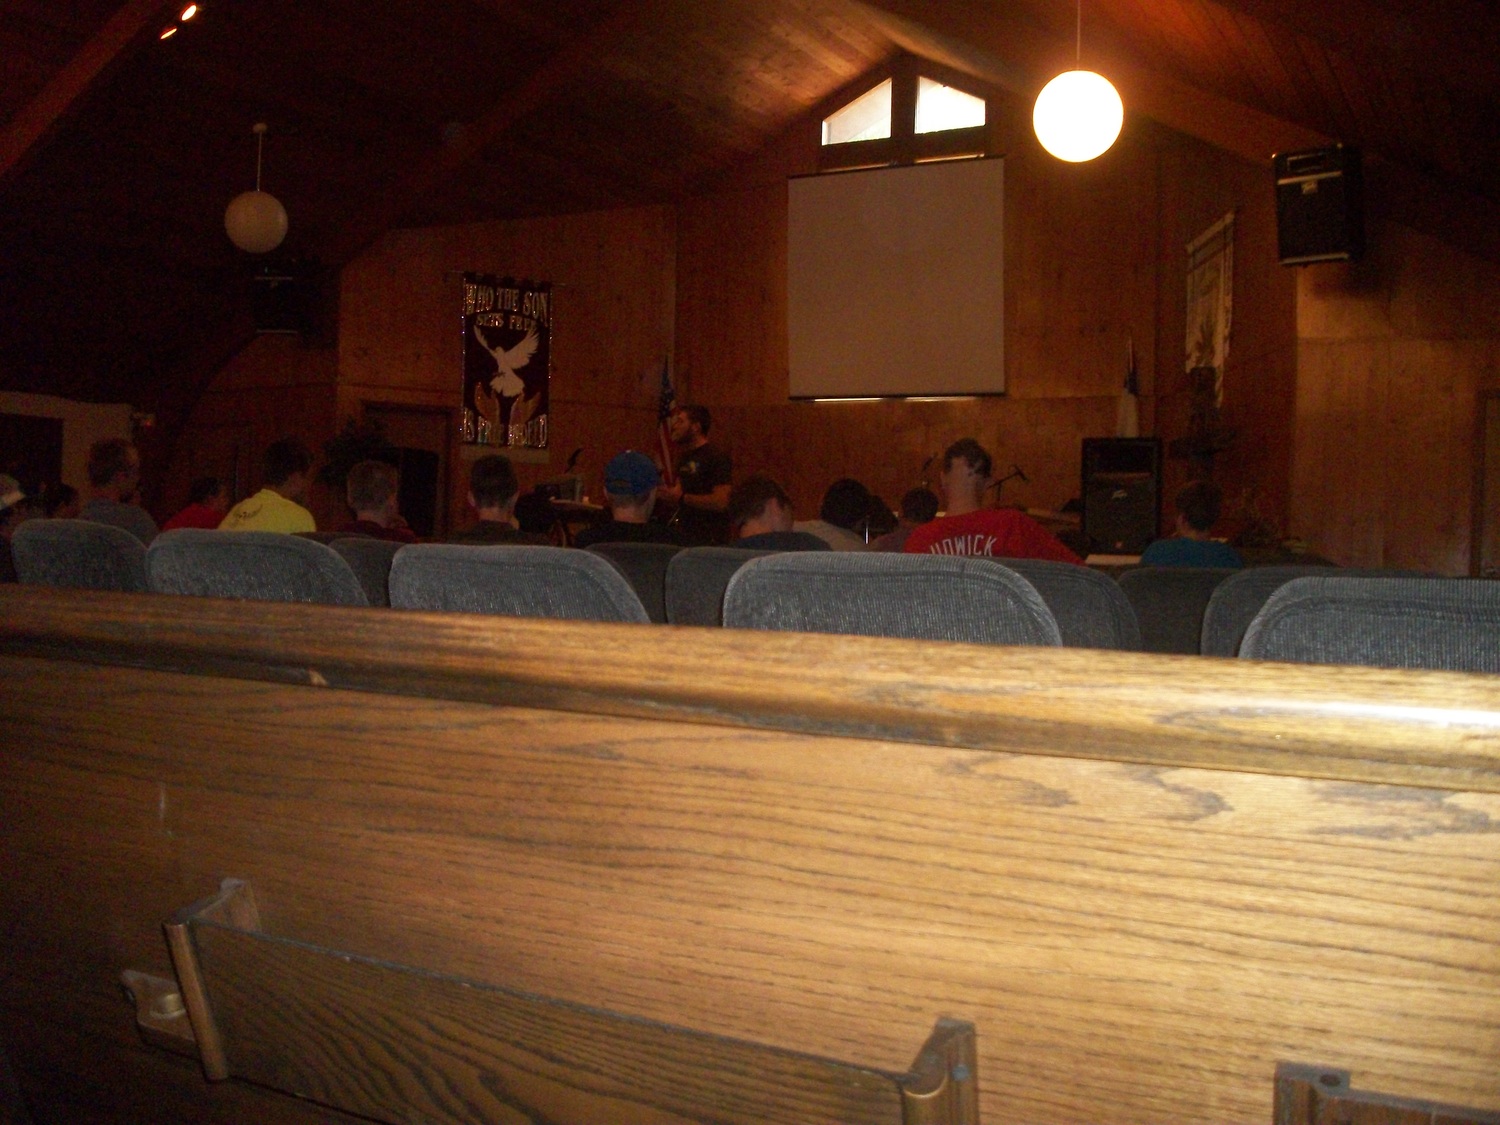 Cameron had the privilege of speaking about missions at a youth camp.